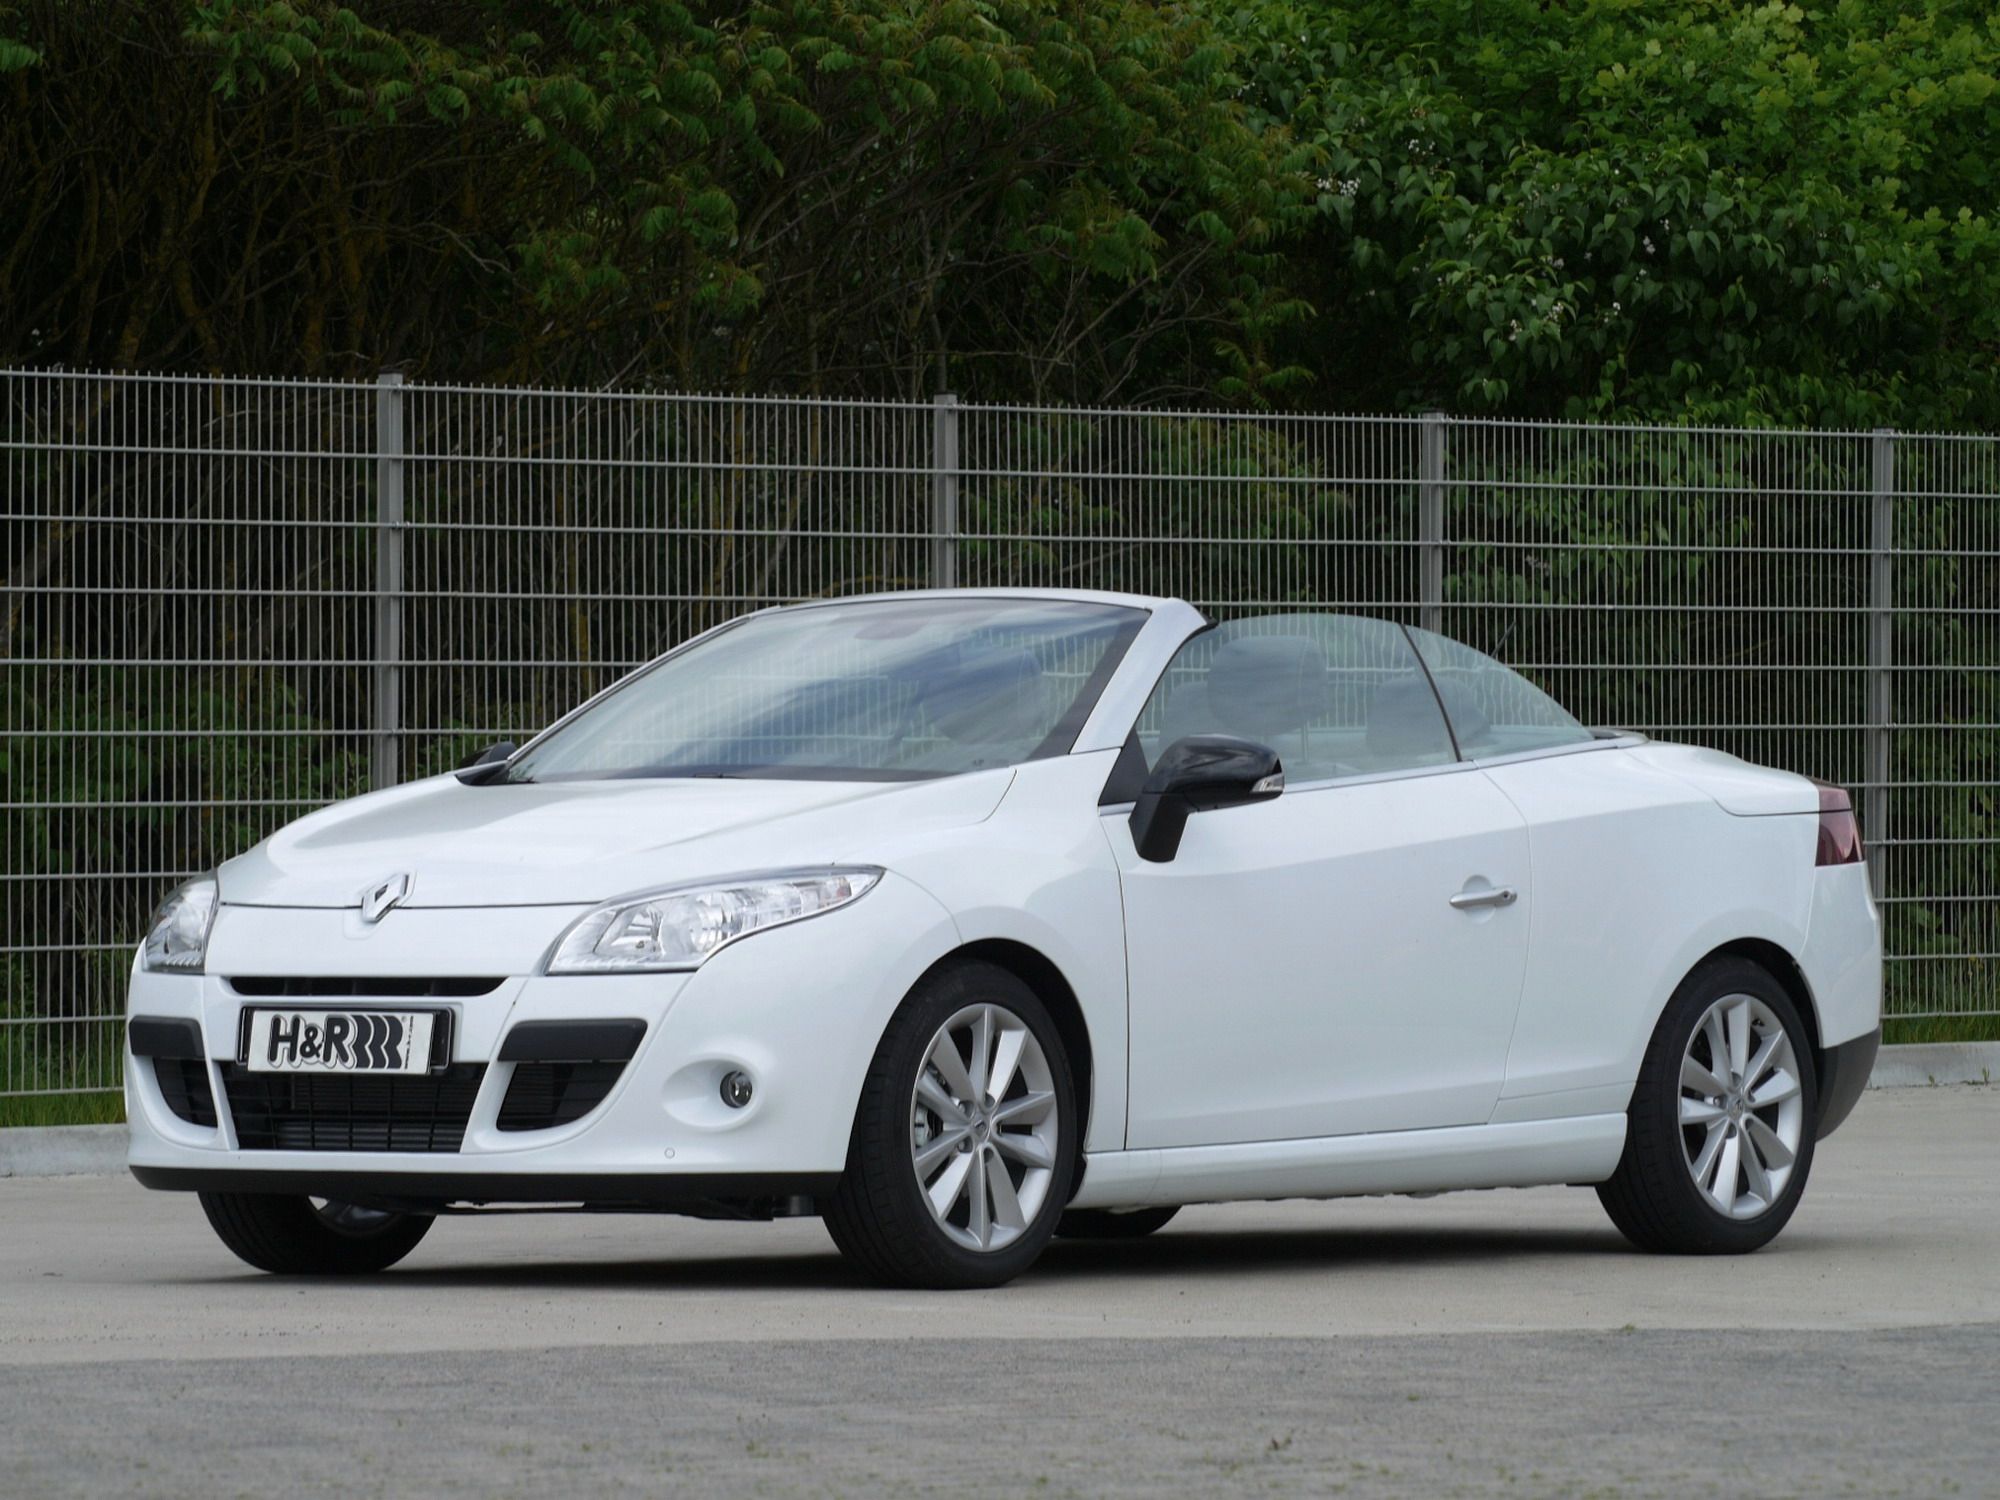 2010 Renault Megane Coupe-Cabrio by H&R